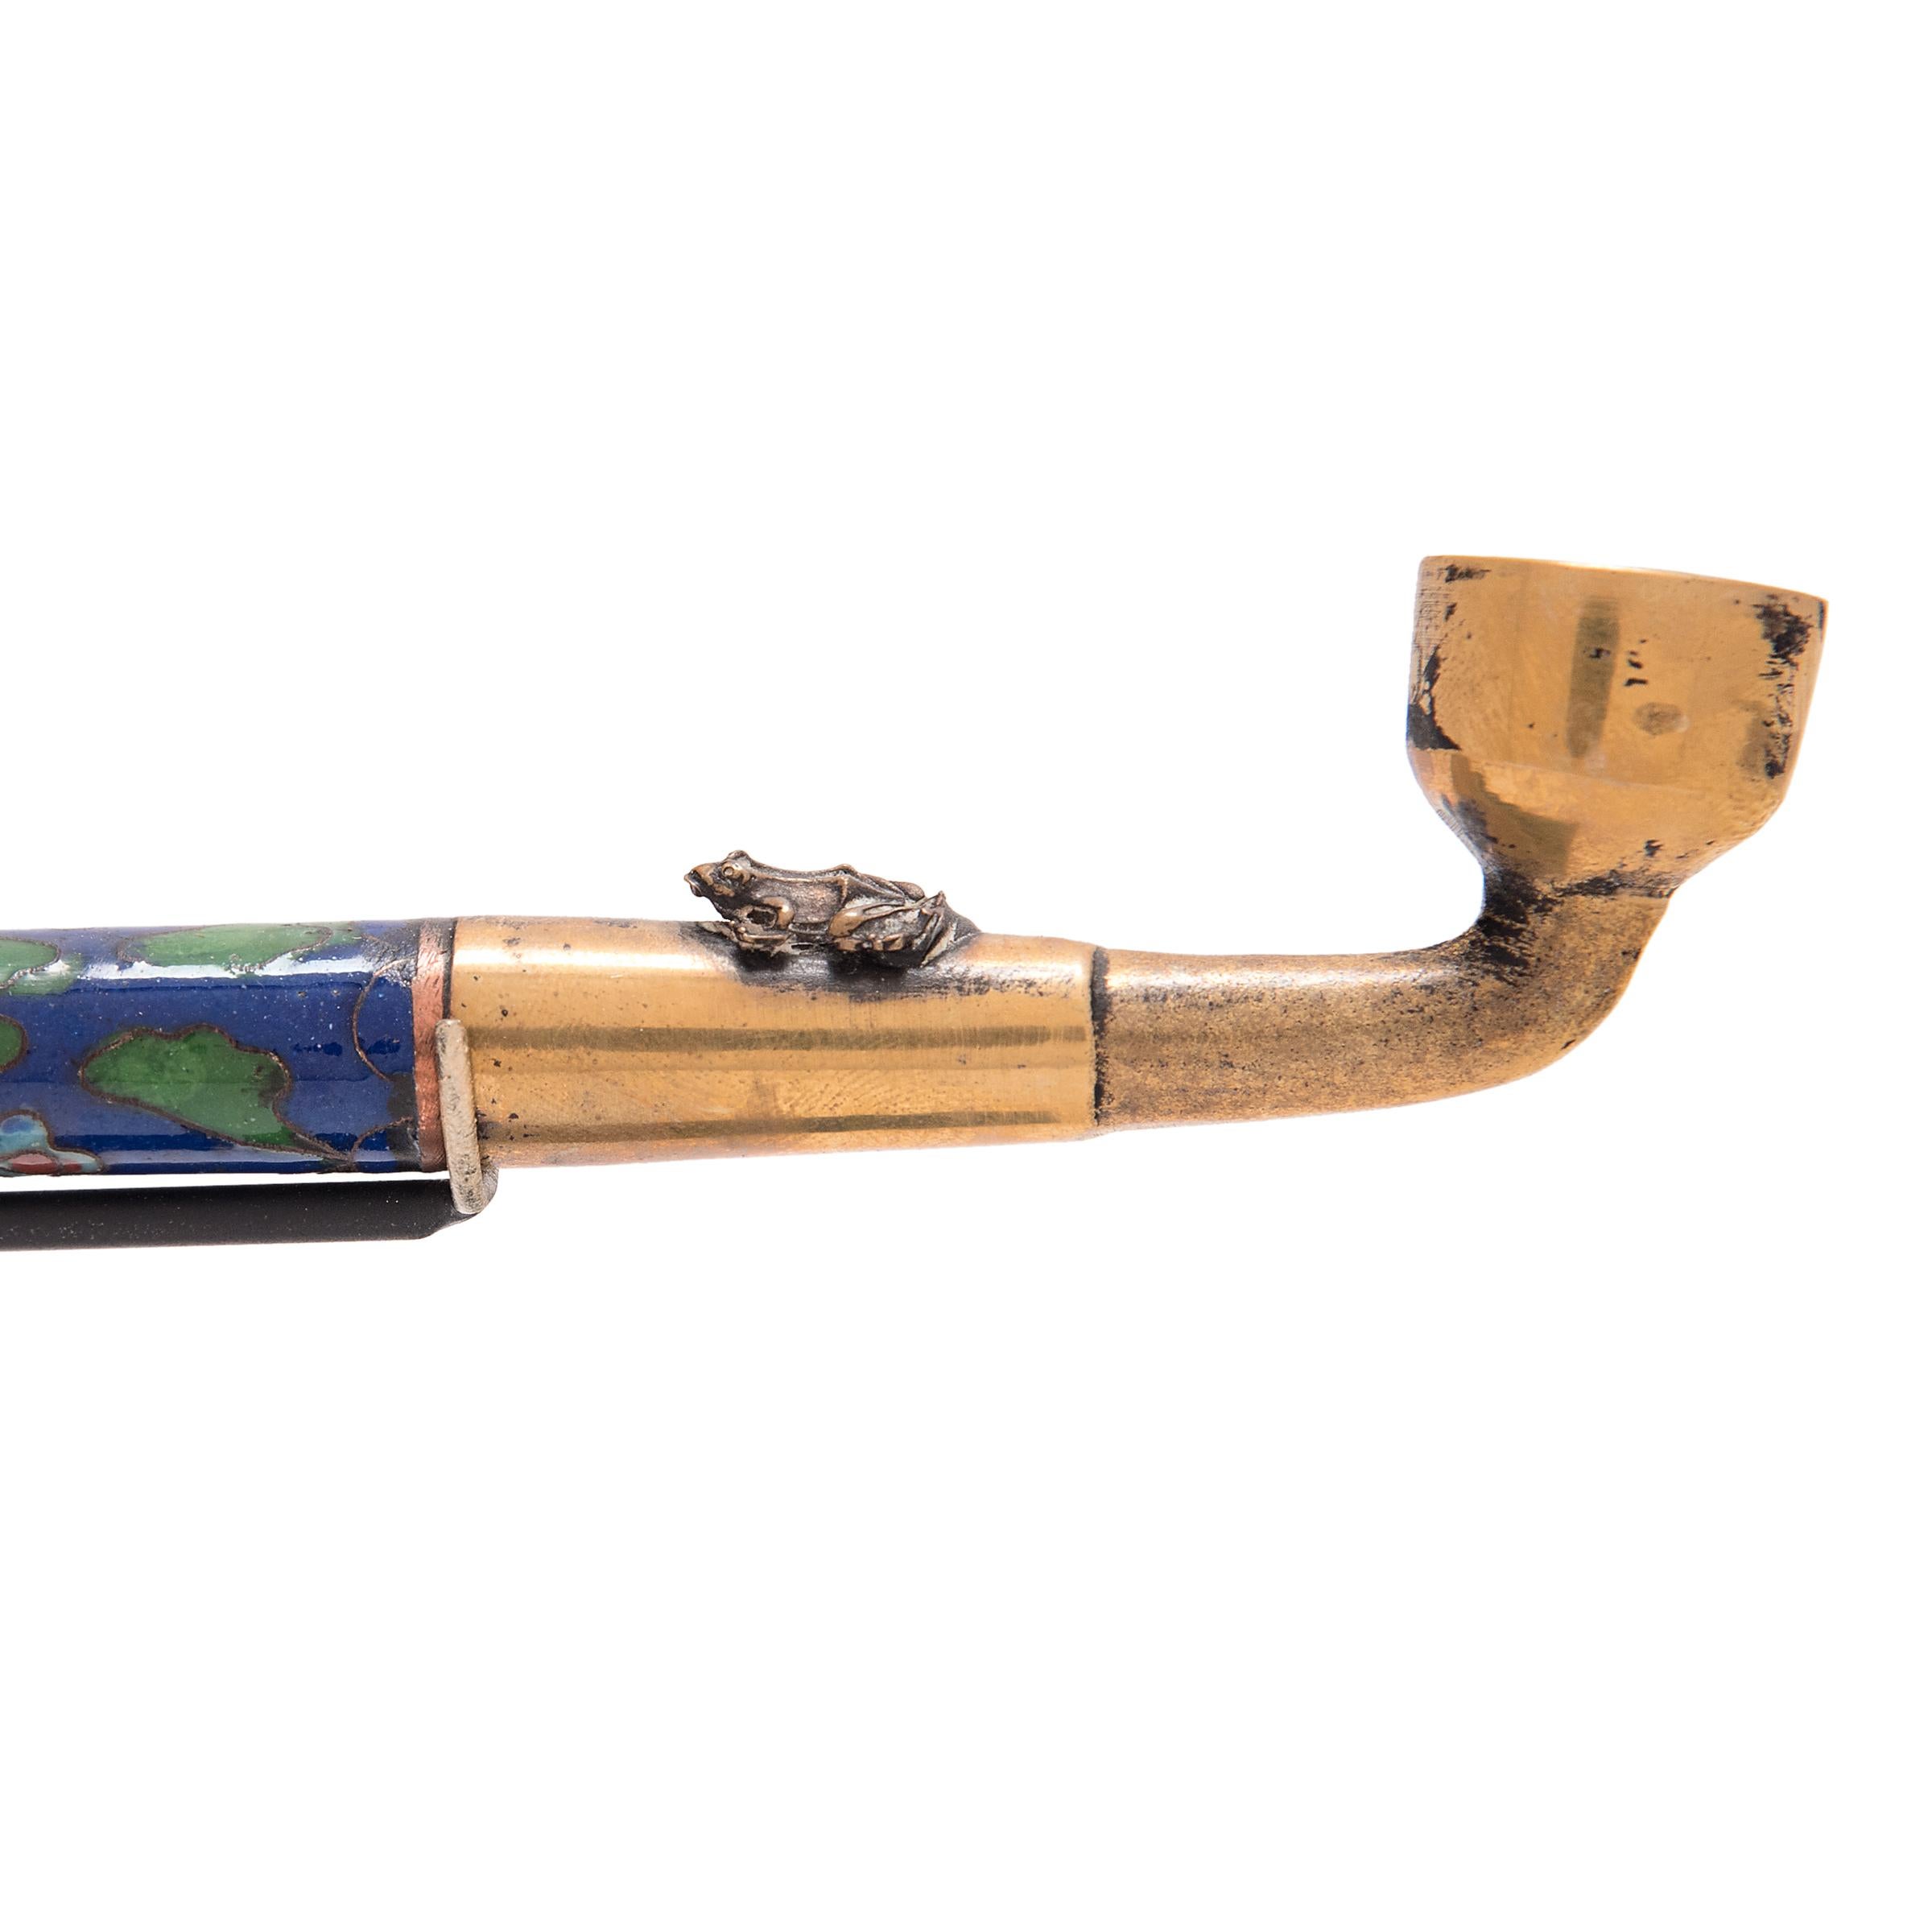 Cloissoné Chinese Blue and Green Cloisonné Opium Pipe, c. 1900